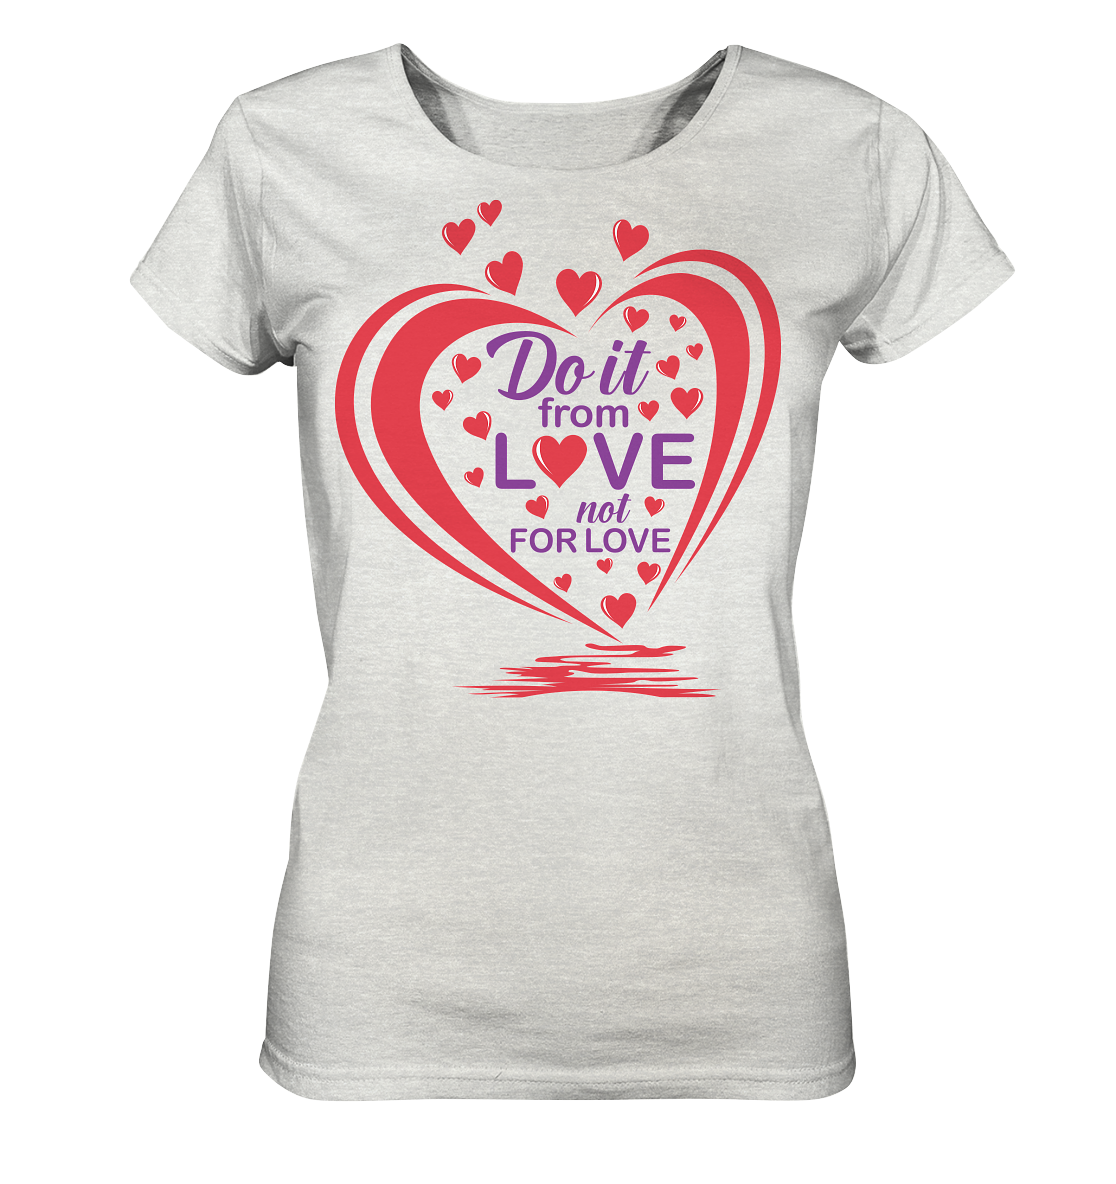 Do it from love not for love - Ladies Organic Shirt (meliert)